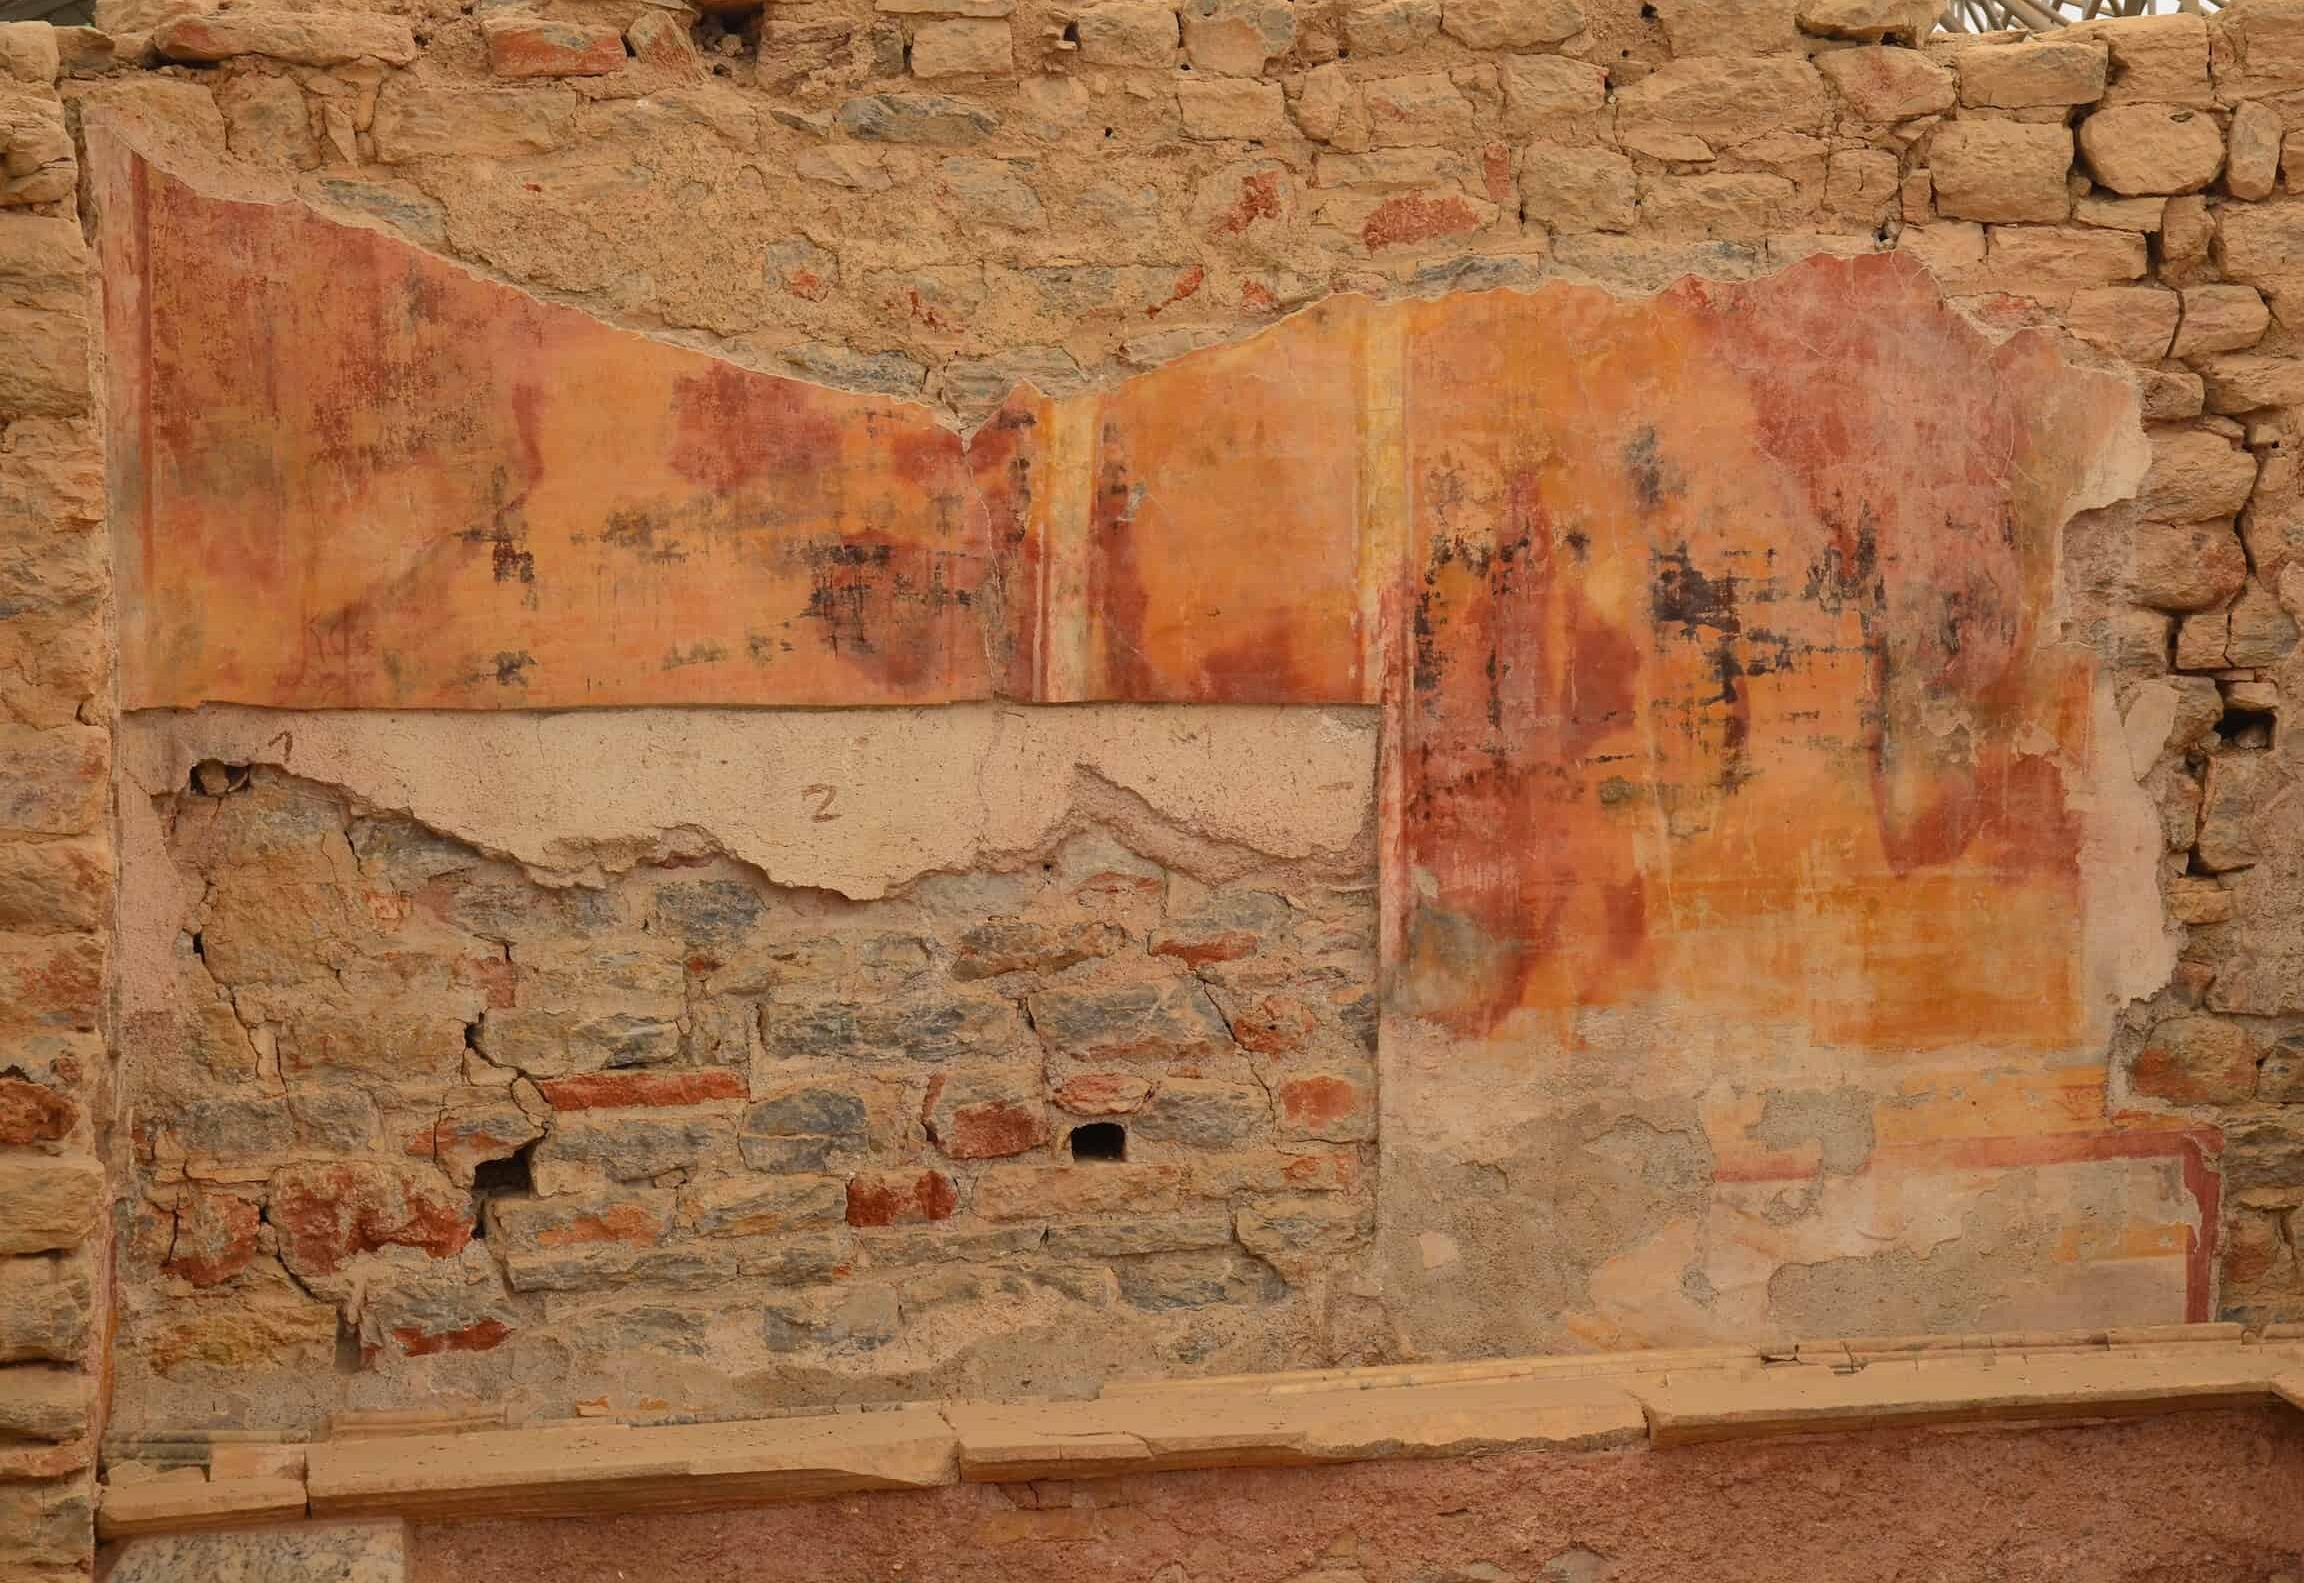 Frescoes in the room to the north of the peristyle courtyard